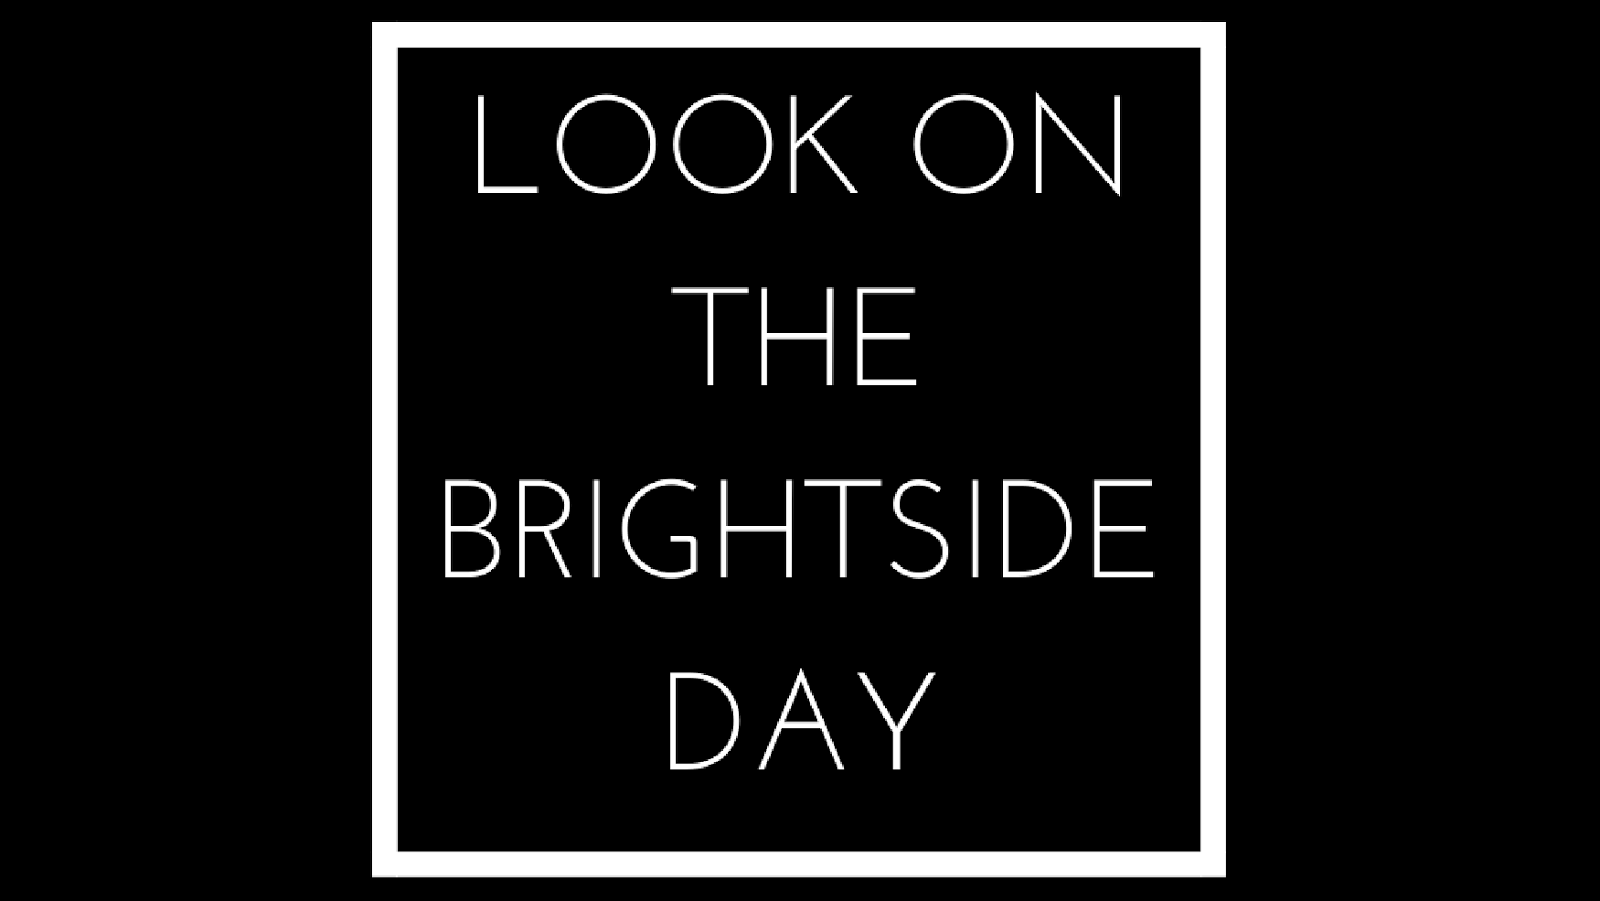 Riverscape Blog, Odenton, MD   December 21st is Look on the Brightside Day. We're helping you celebrate with some ideas! Try it at your apartment or away.